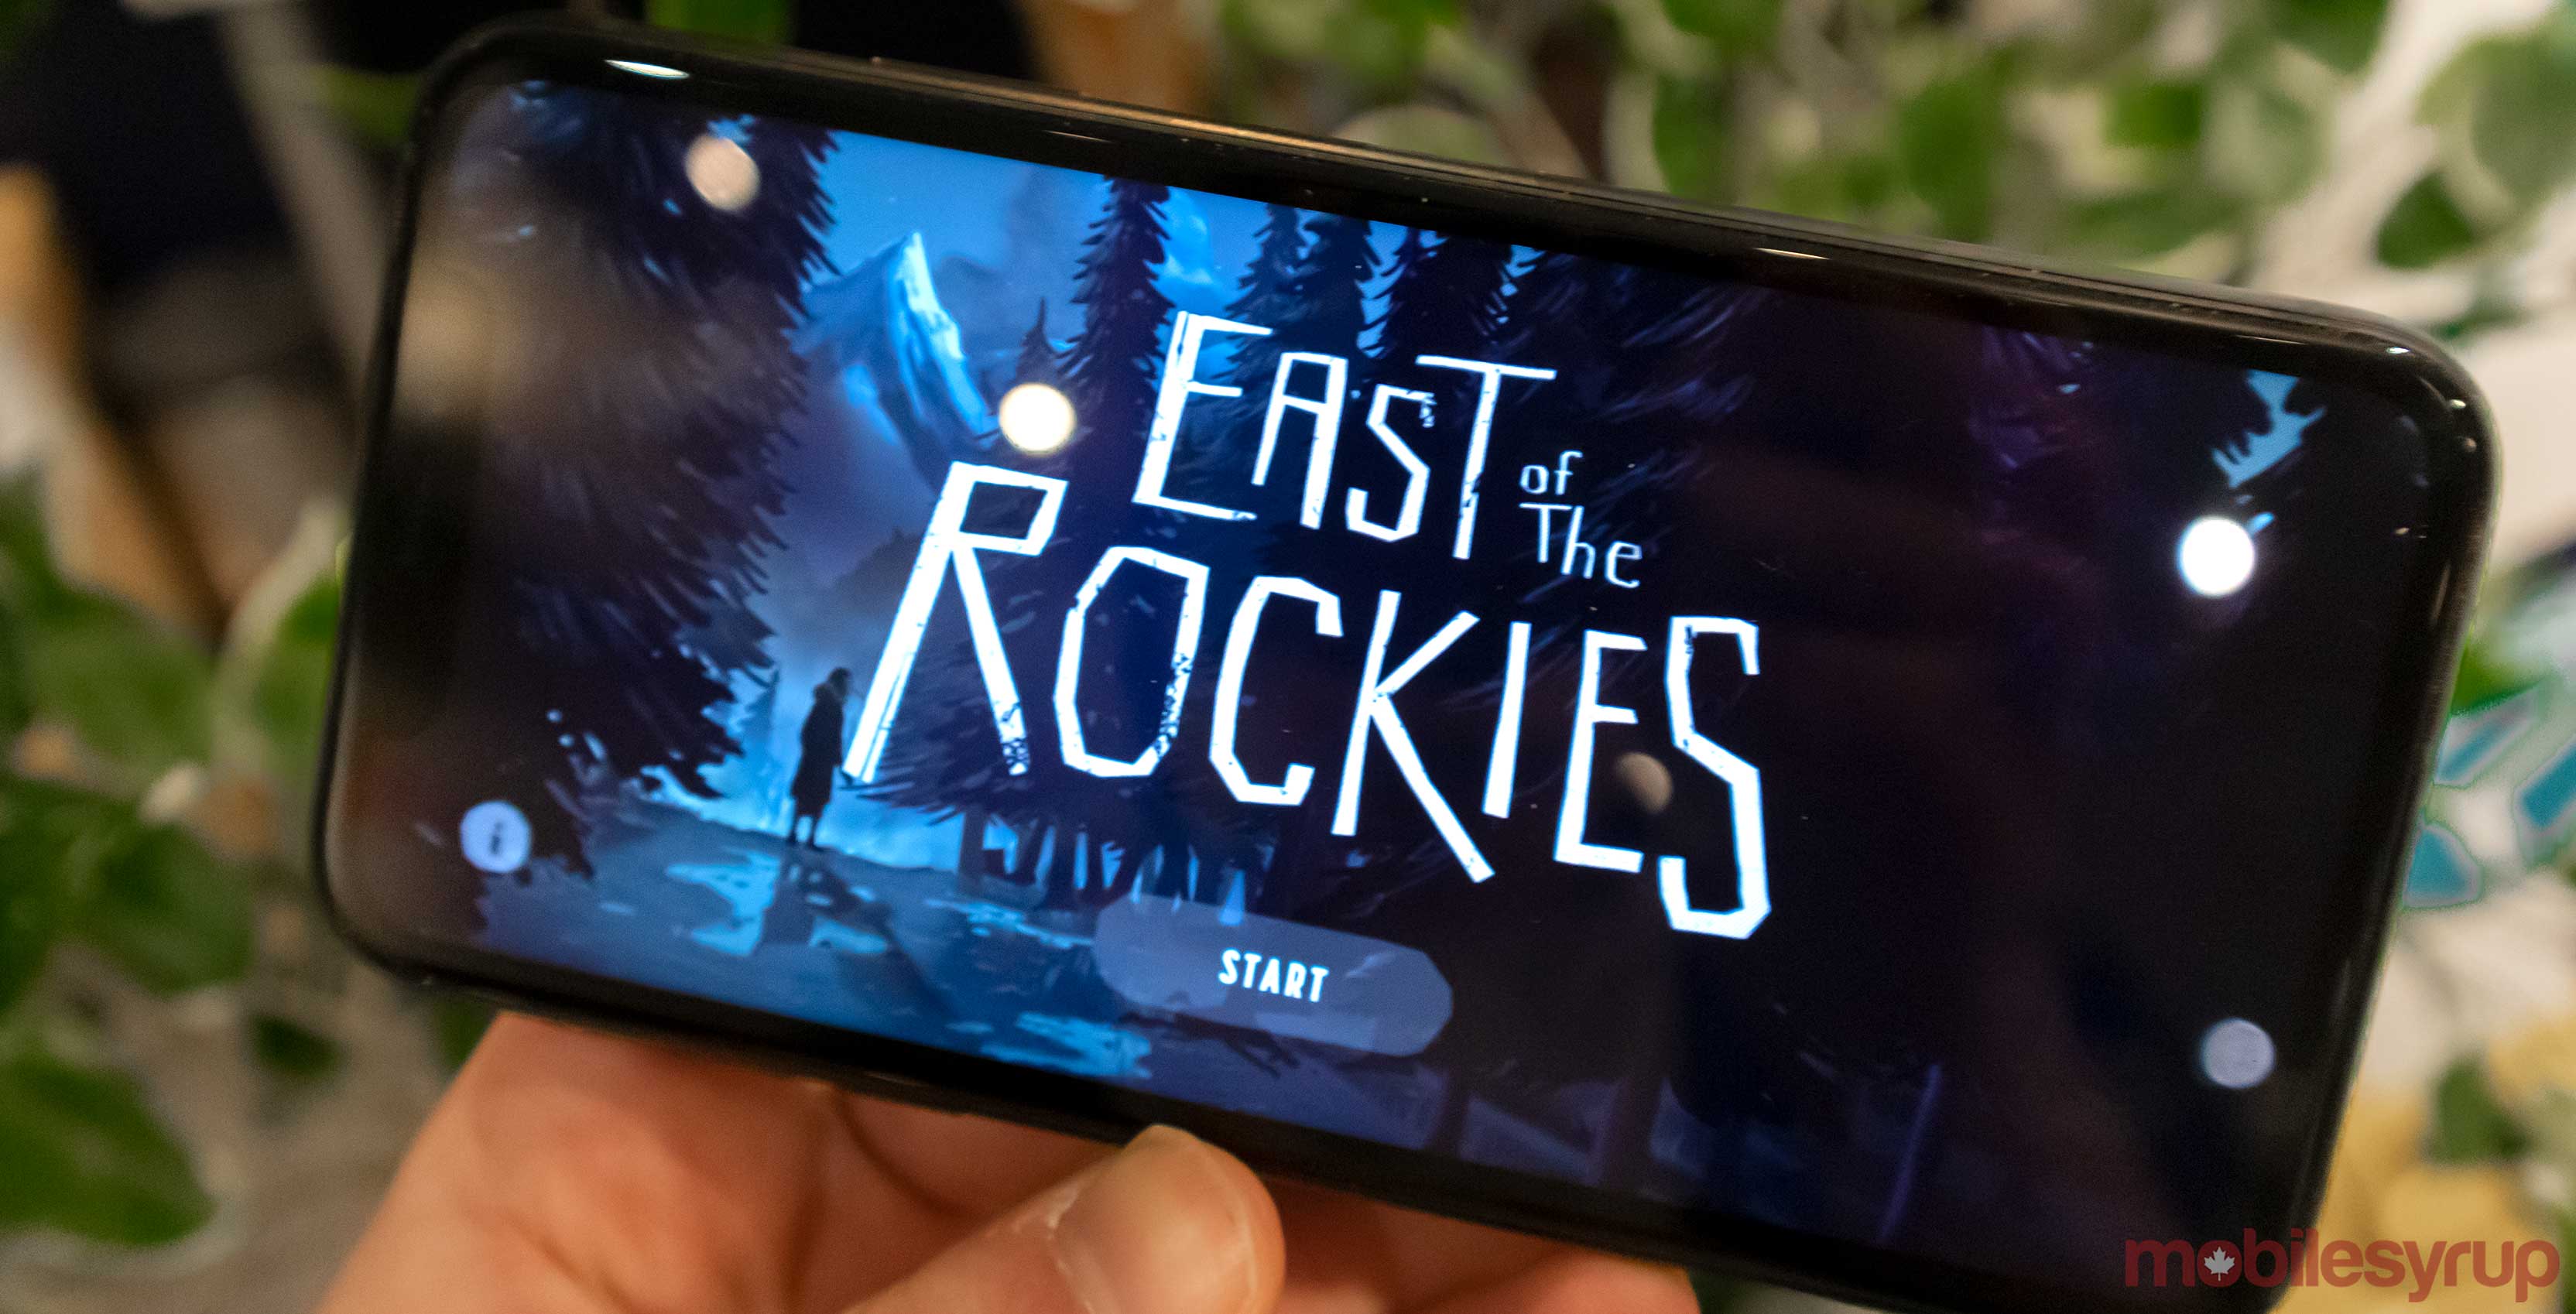 East of the Rockies mobile game